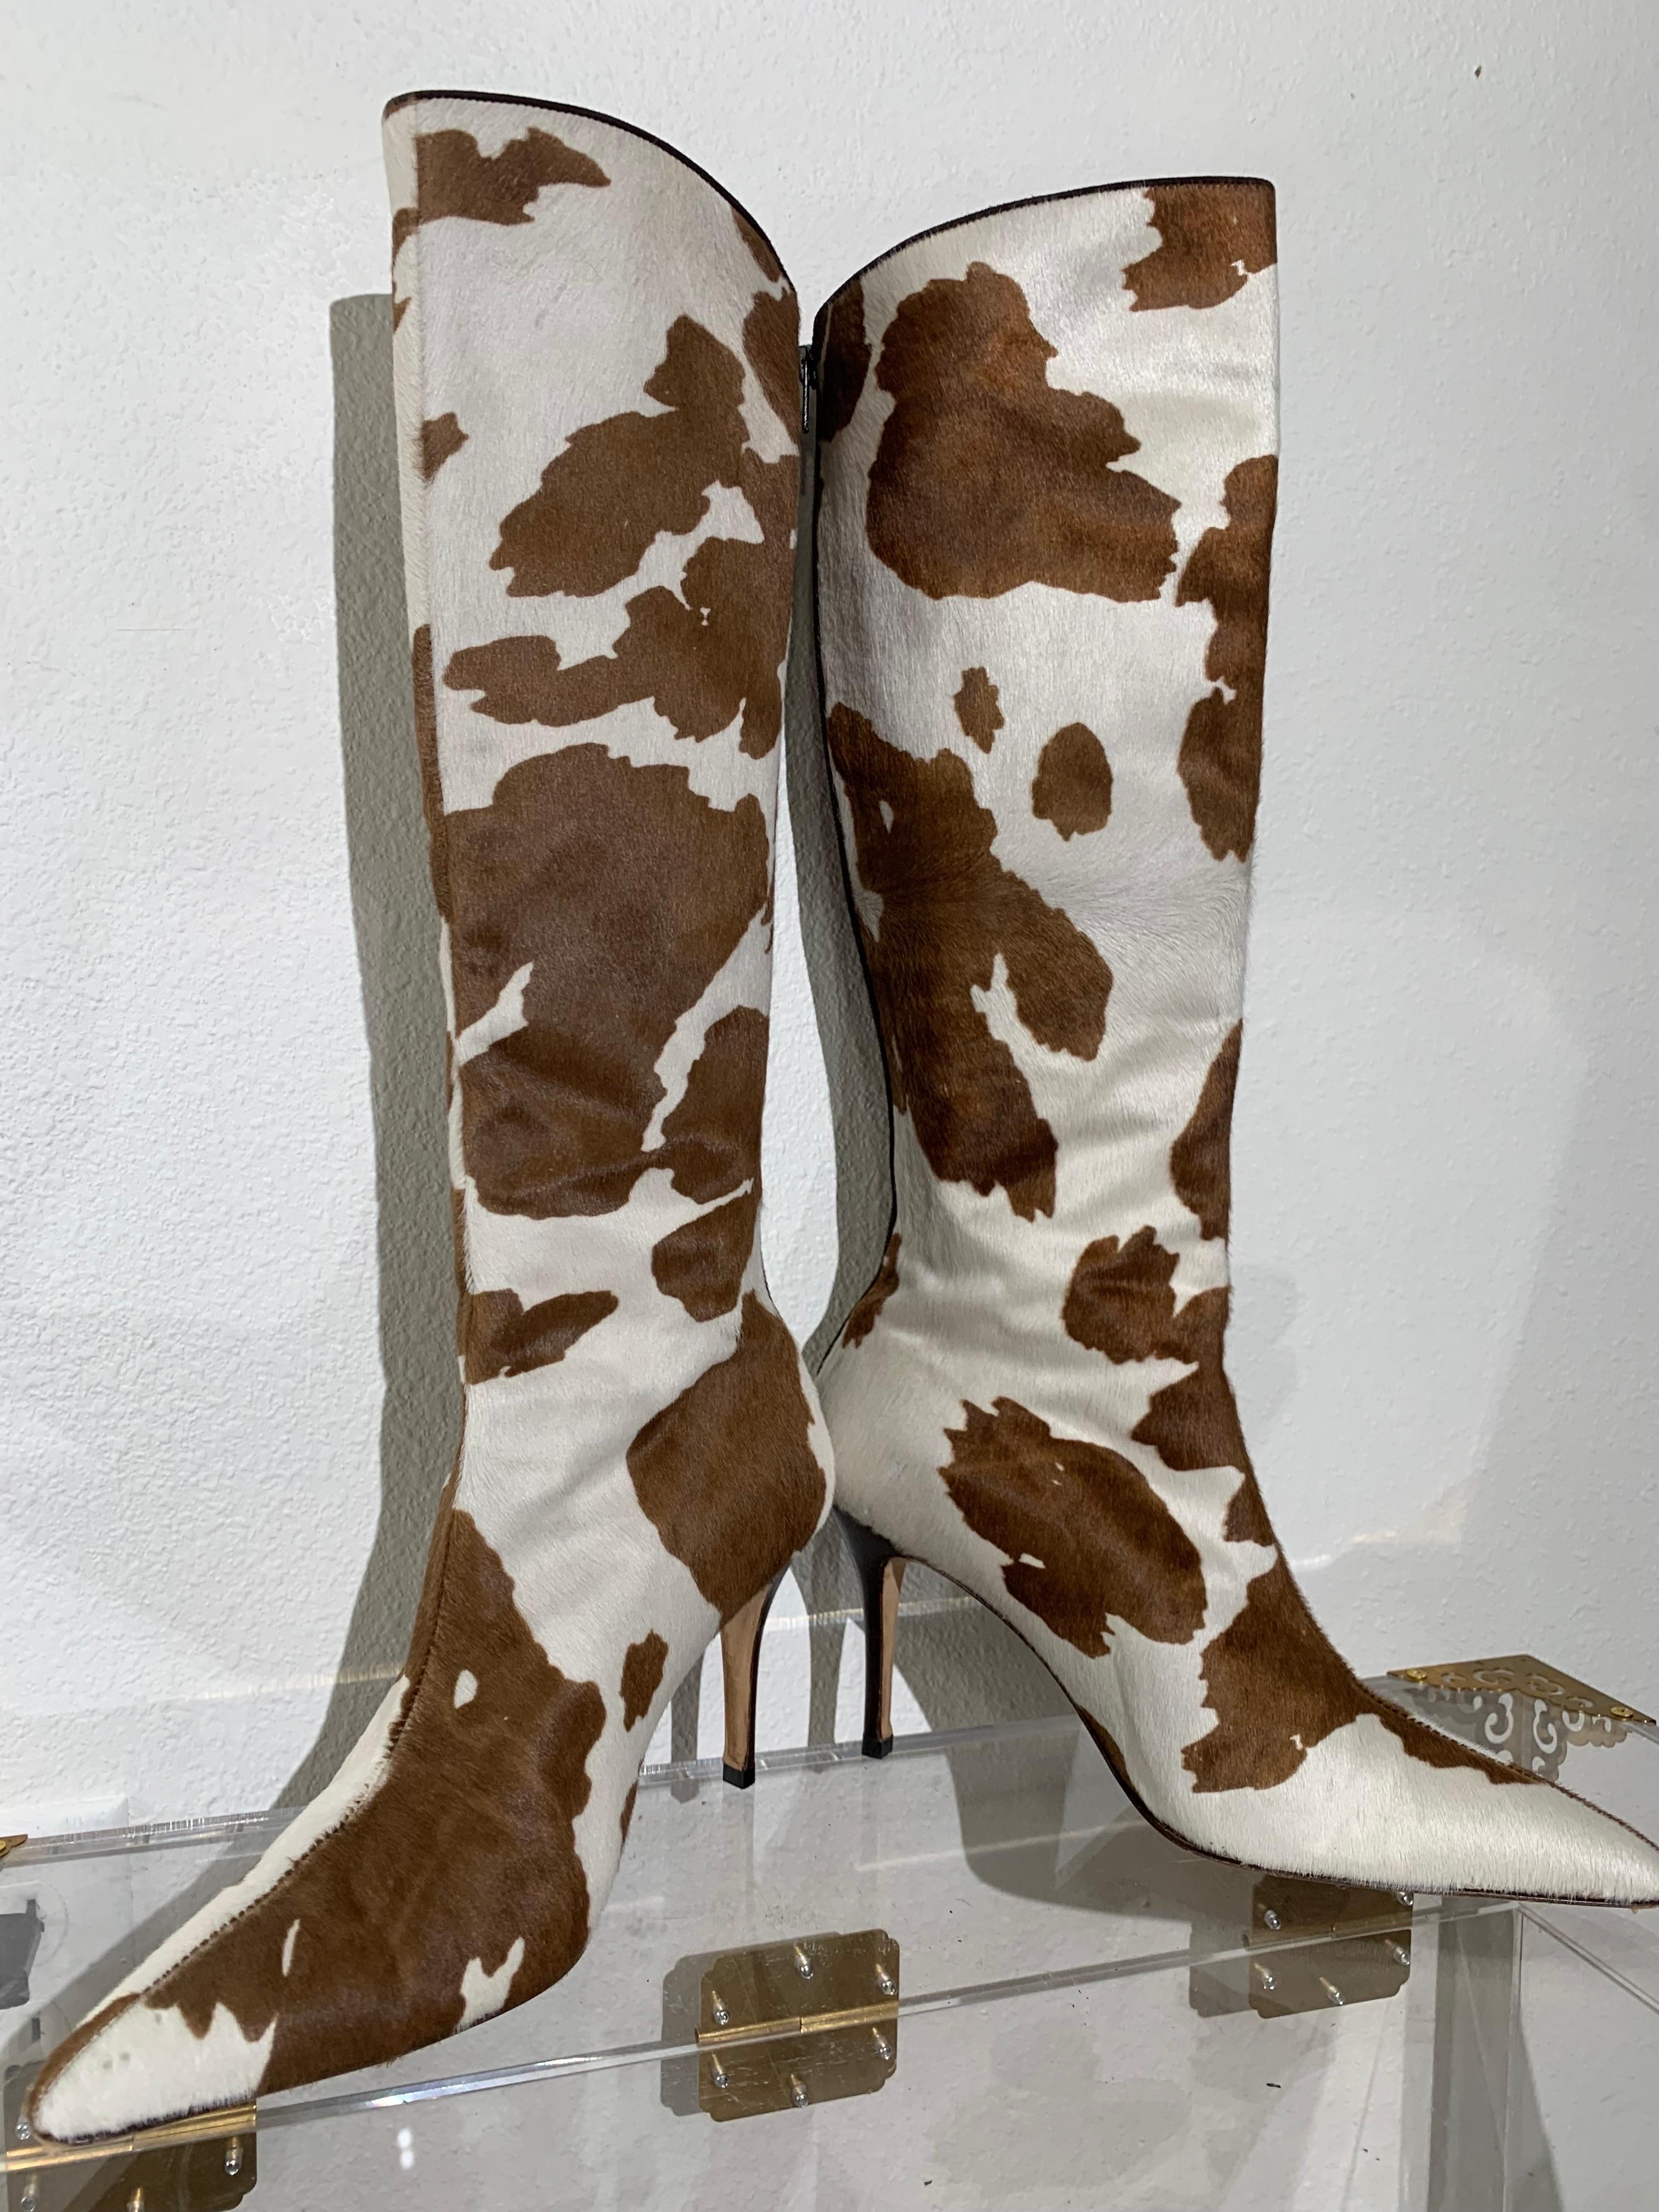 Manolo Blahnik Brown & White Cow Print Leather Knee-High Stiletto Heel Boots:  Spotted calf hair, 19